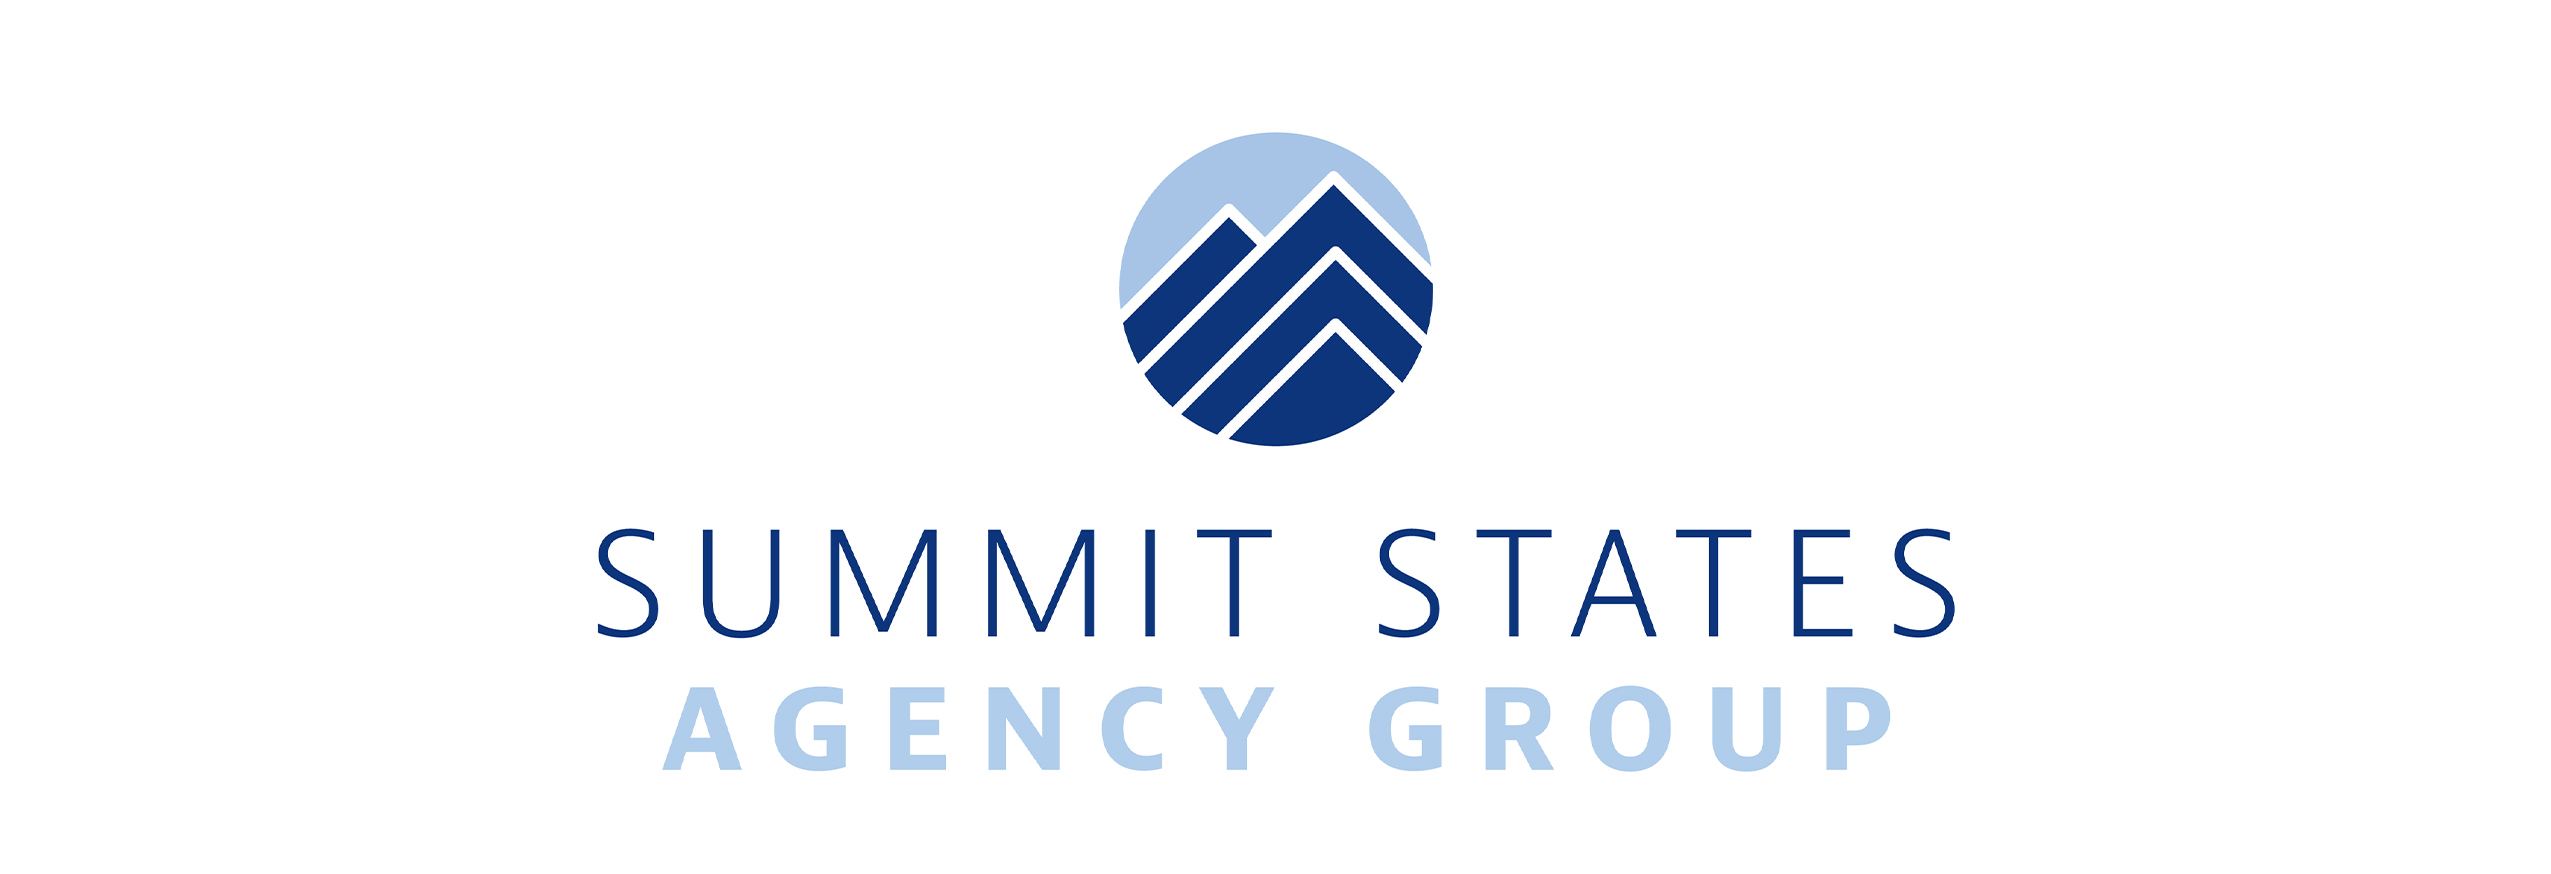 Summit_States_Agency_Group-2551x874-1